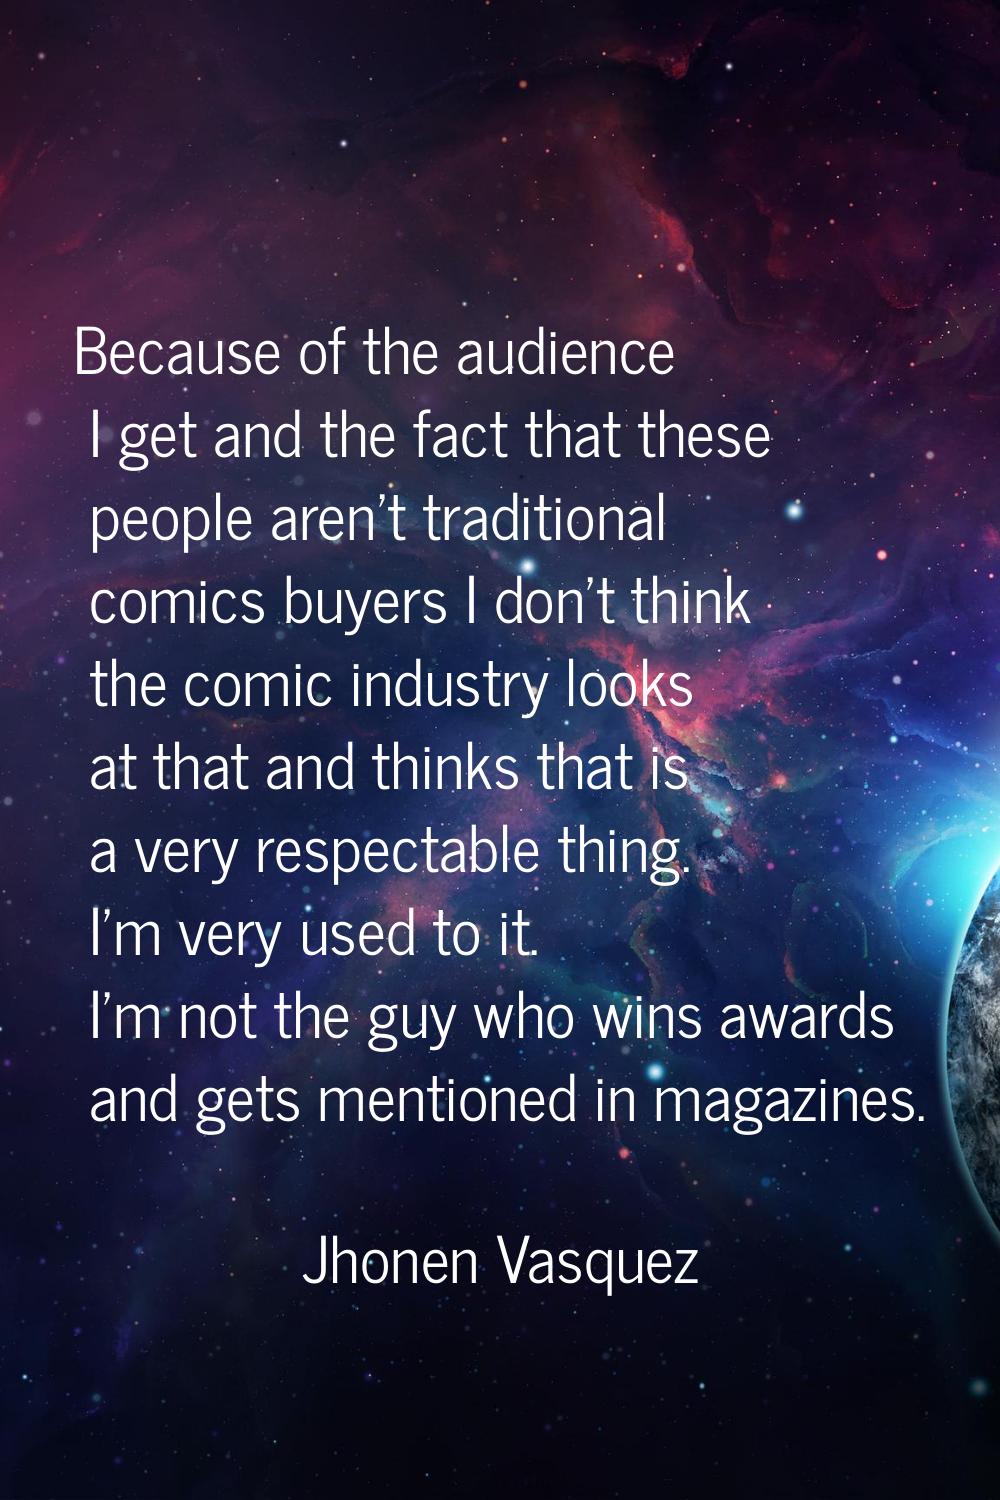 Because of the audience I get and the fact that these people aren't traditional comics buyers I don